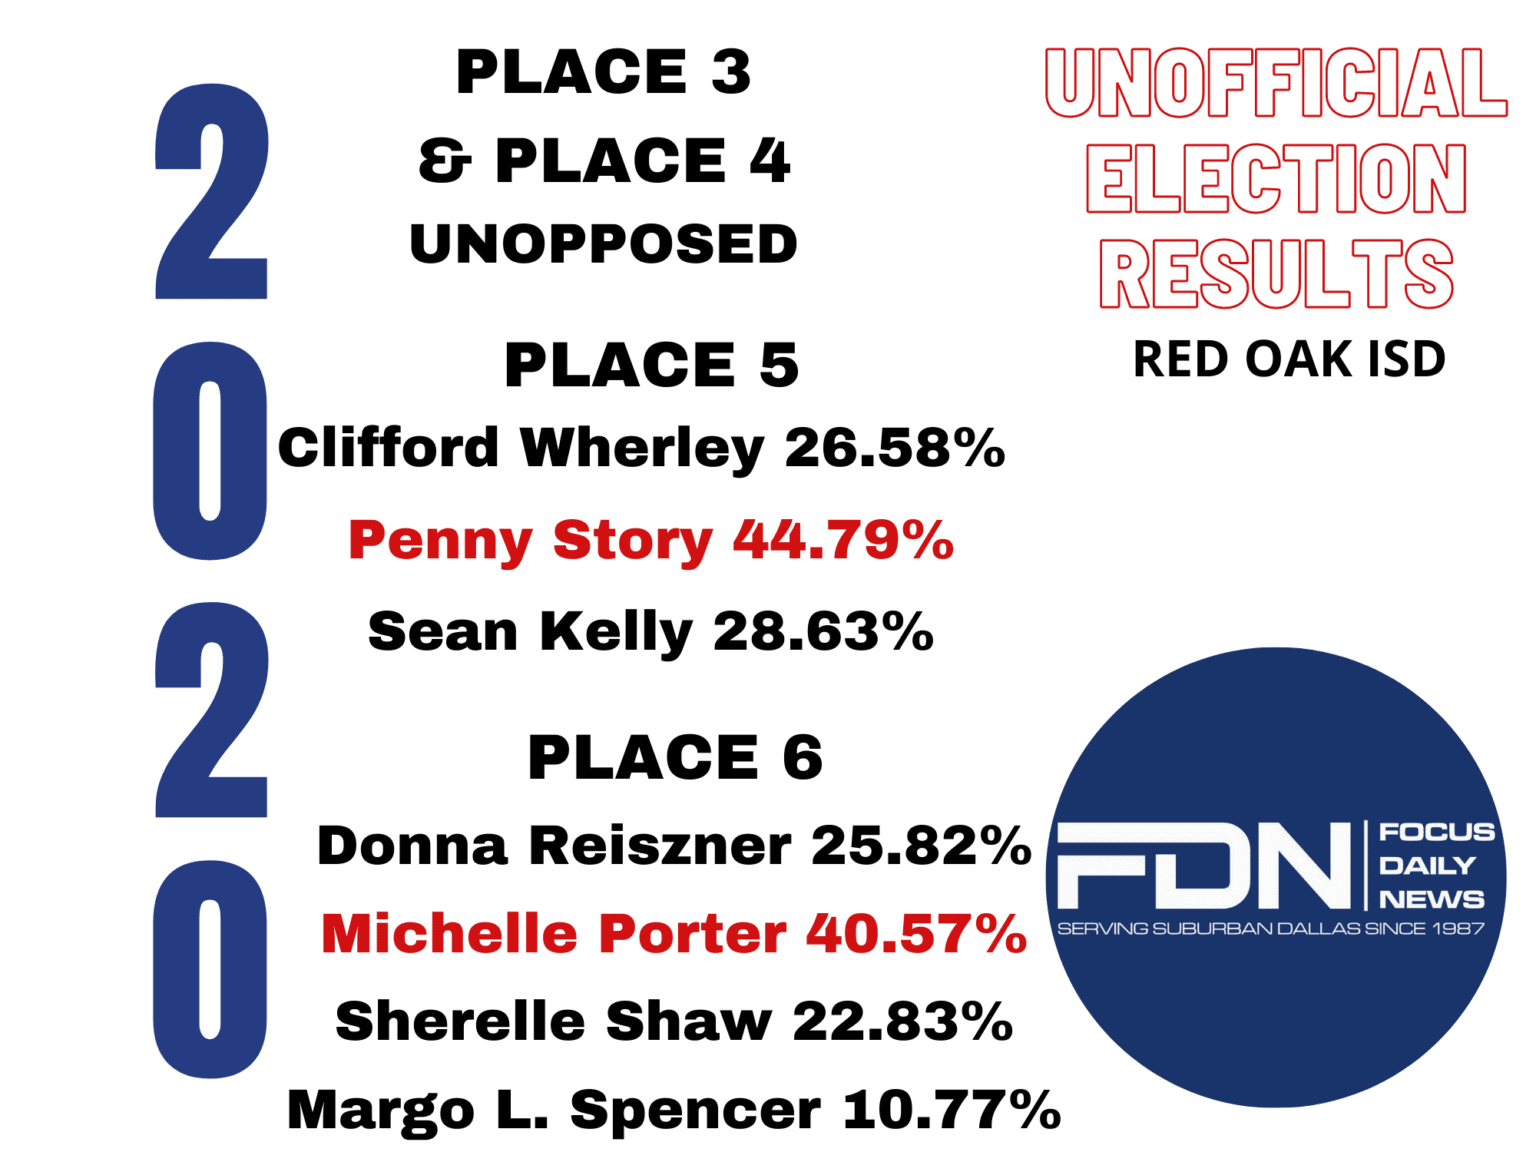 Red Oak ISD Unofficial Election Results - Focus Daily News